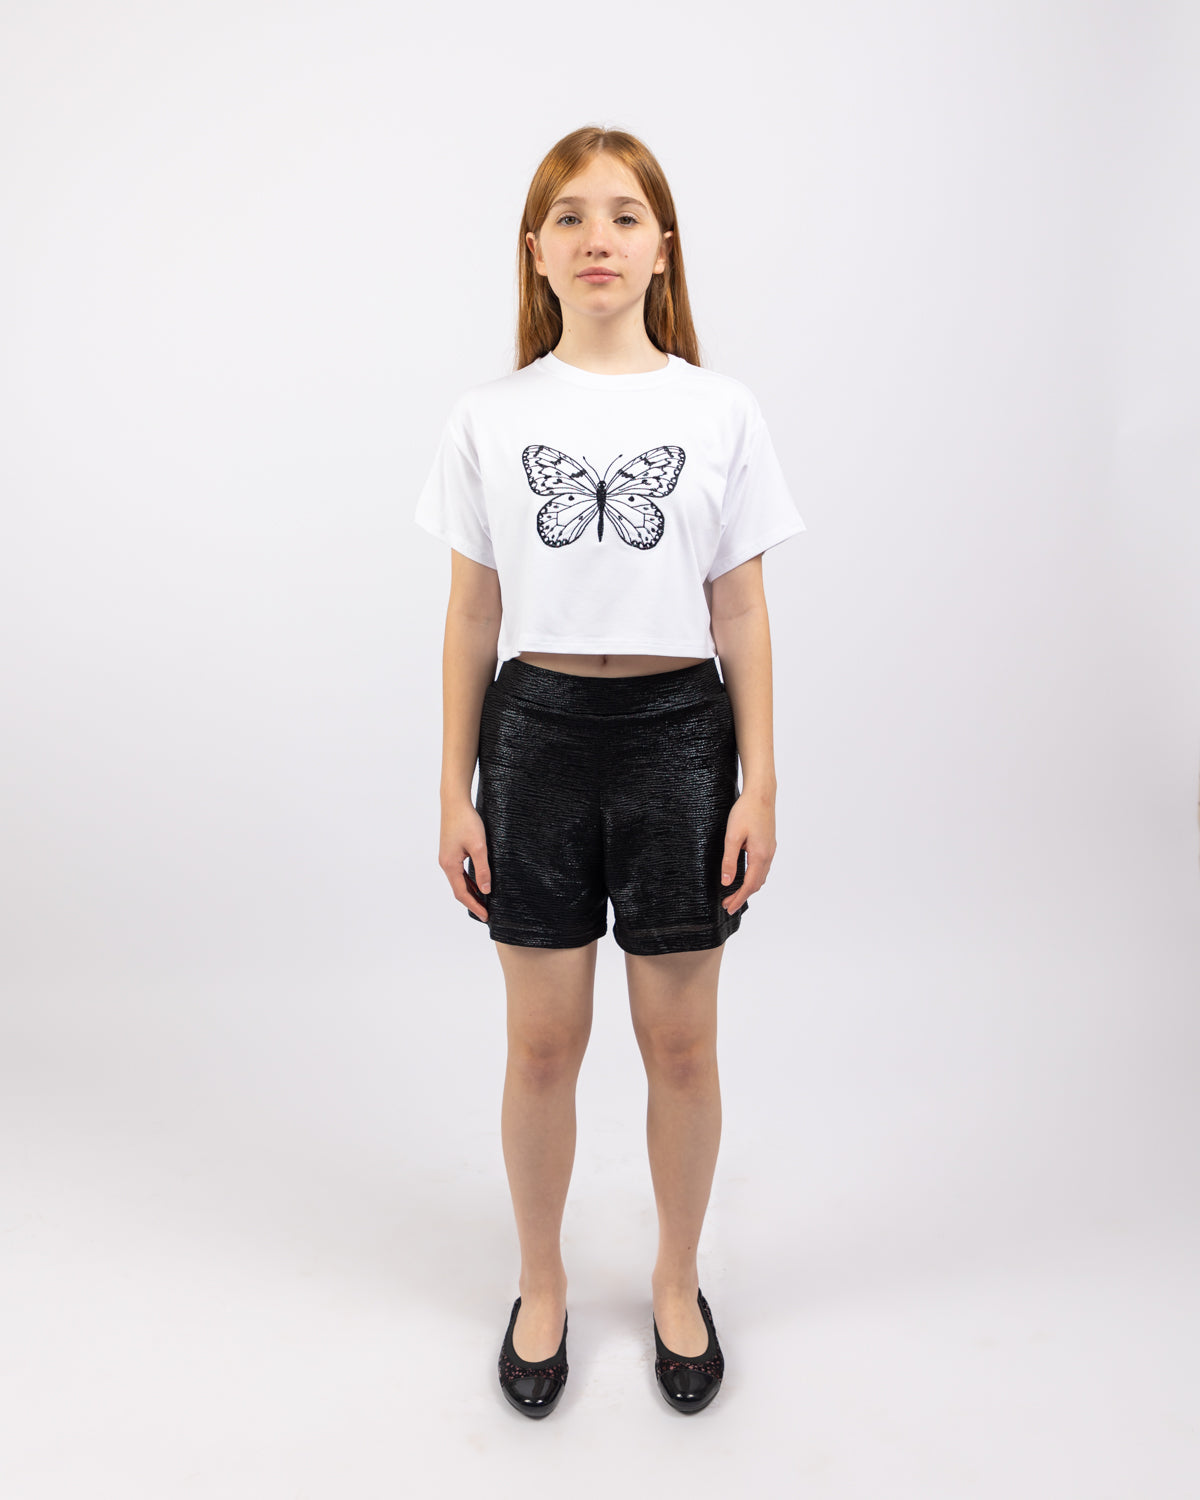 Butterfly Crop Top For Girls - White